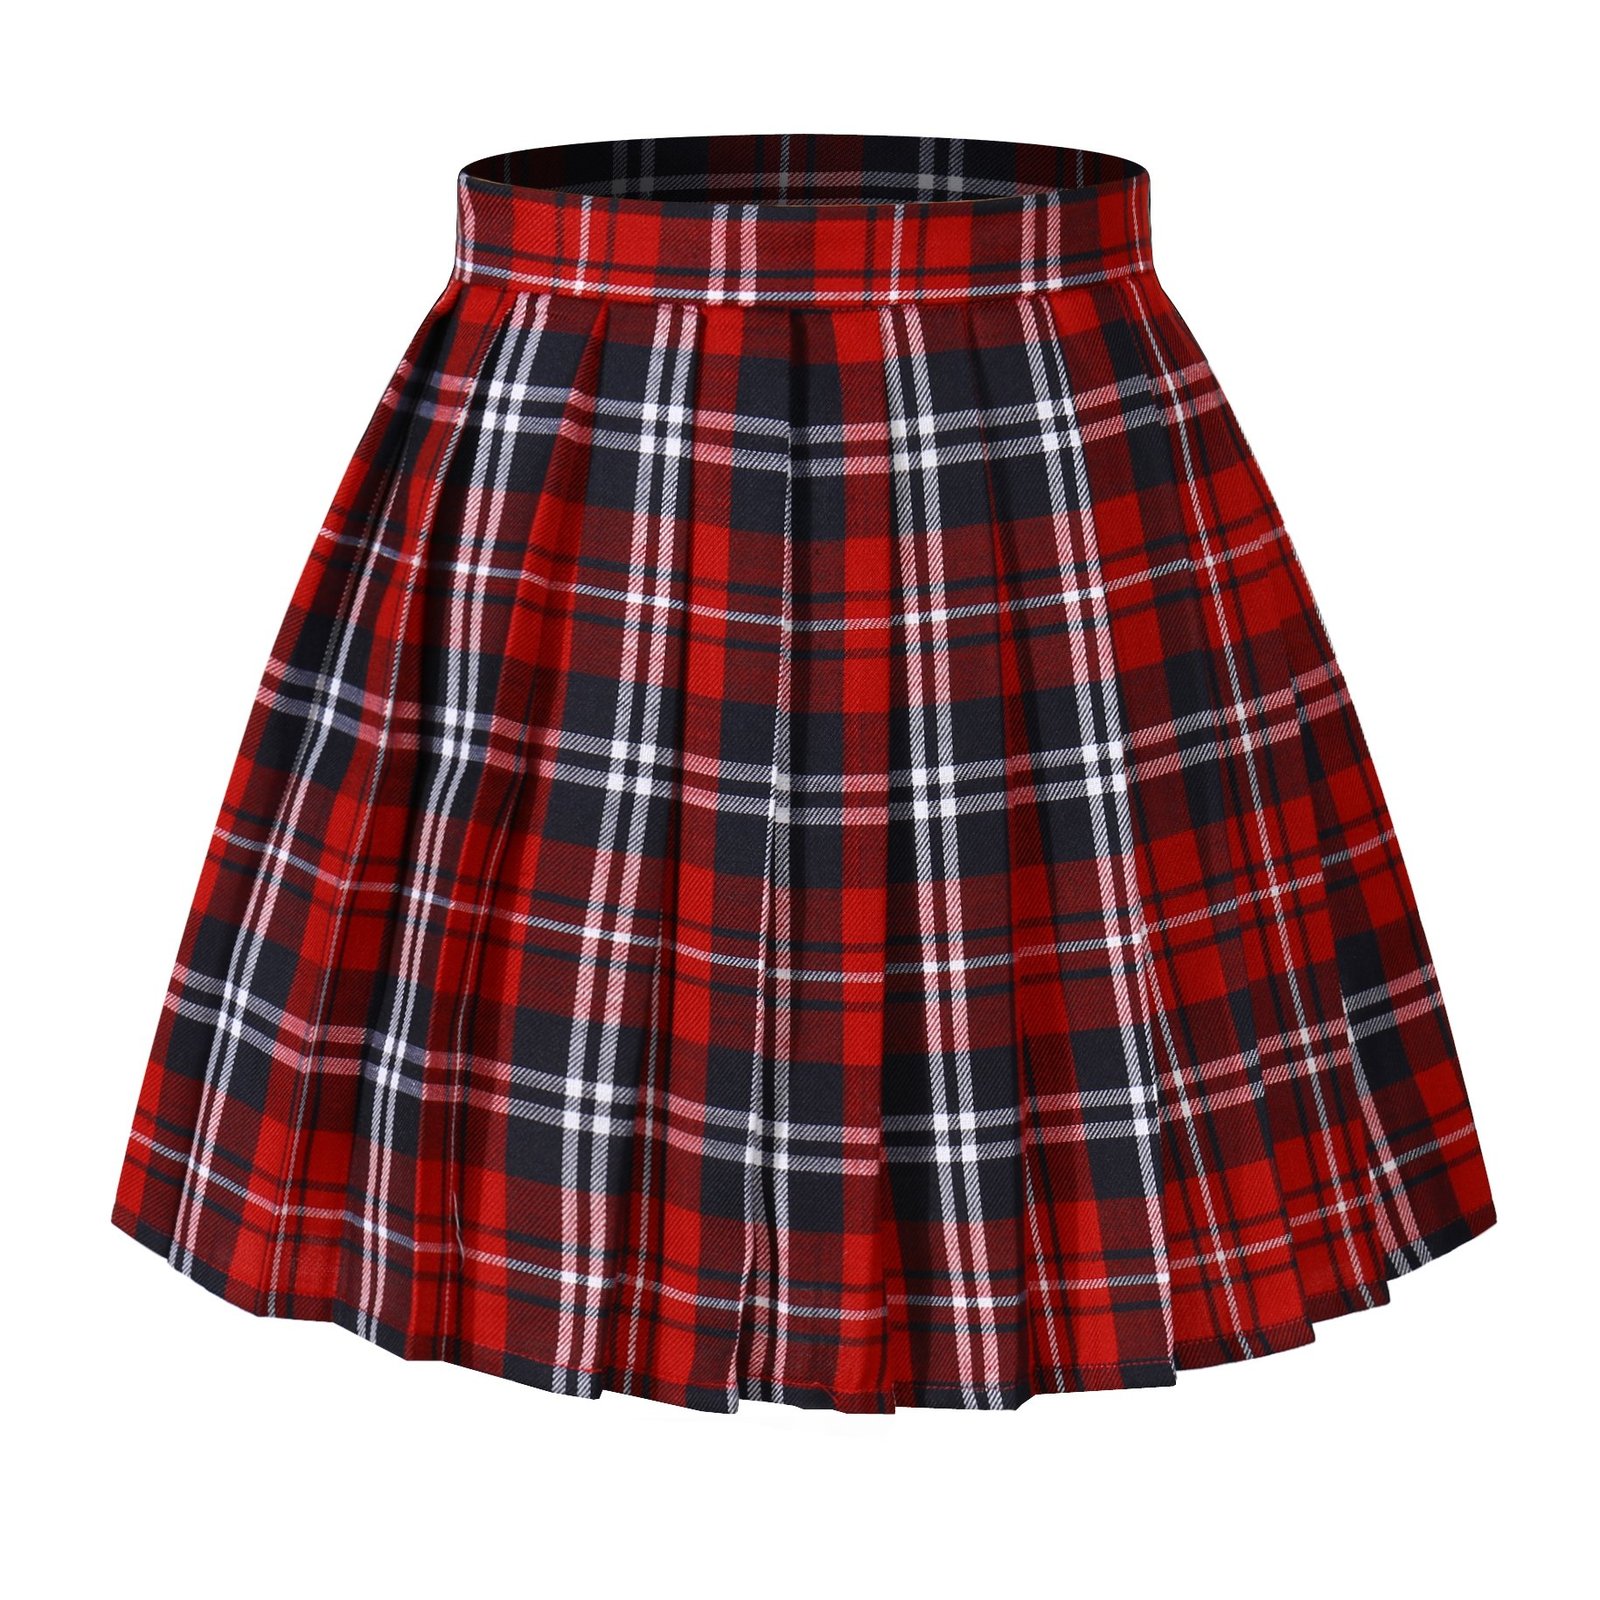 Girl's Japan A-line Kilt Plaid Pleated Anime costumes Skirts (XS,Red blue )